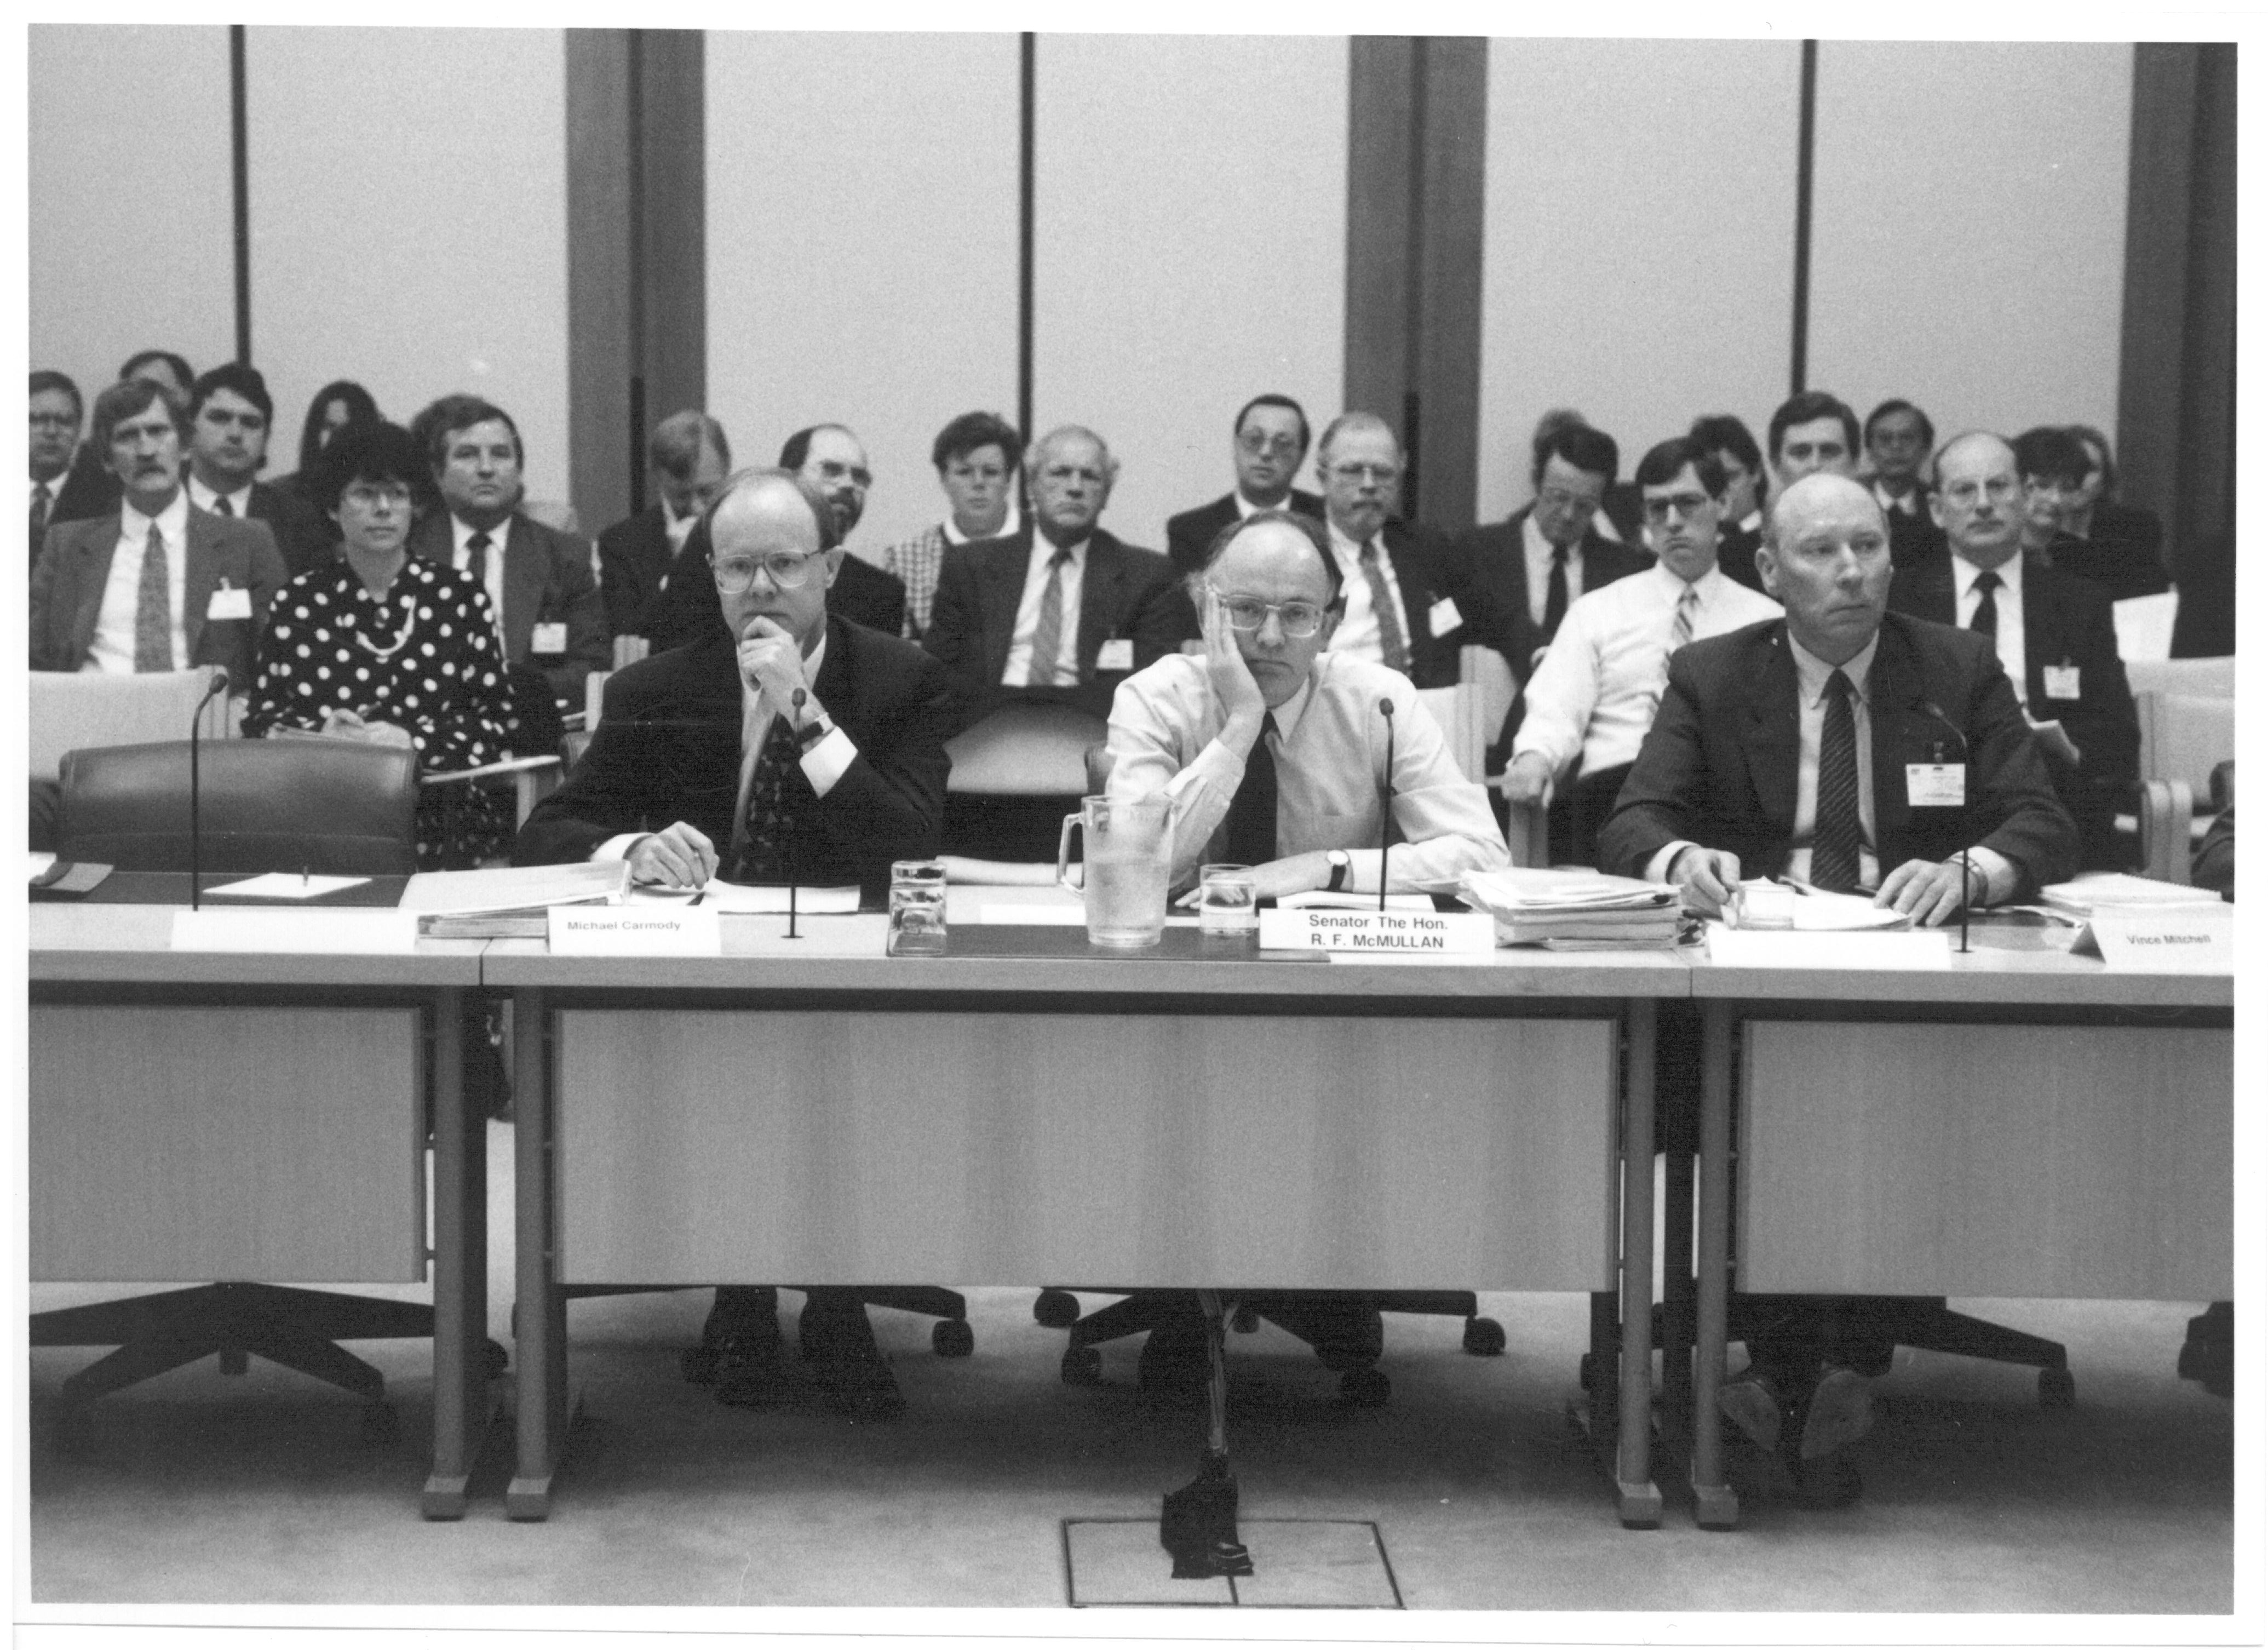 Senator the Hon Bob McMullan, Parliamentary Secretary to the Treasurer, appearing with officers from the Australian Taxation Office at supplementary budget estimates hearing, 11 October 1991. Seated L-R: Witnesses Michael Carmody [Second Commissioner of Taxation], Senator Bob McMullan [Parliamentary Secretary to the Treasurer] and Vince Mitchell [First Assistant Commissioner, Taxpayer Audit].